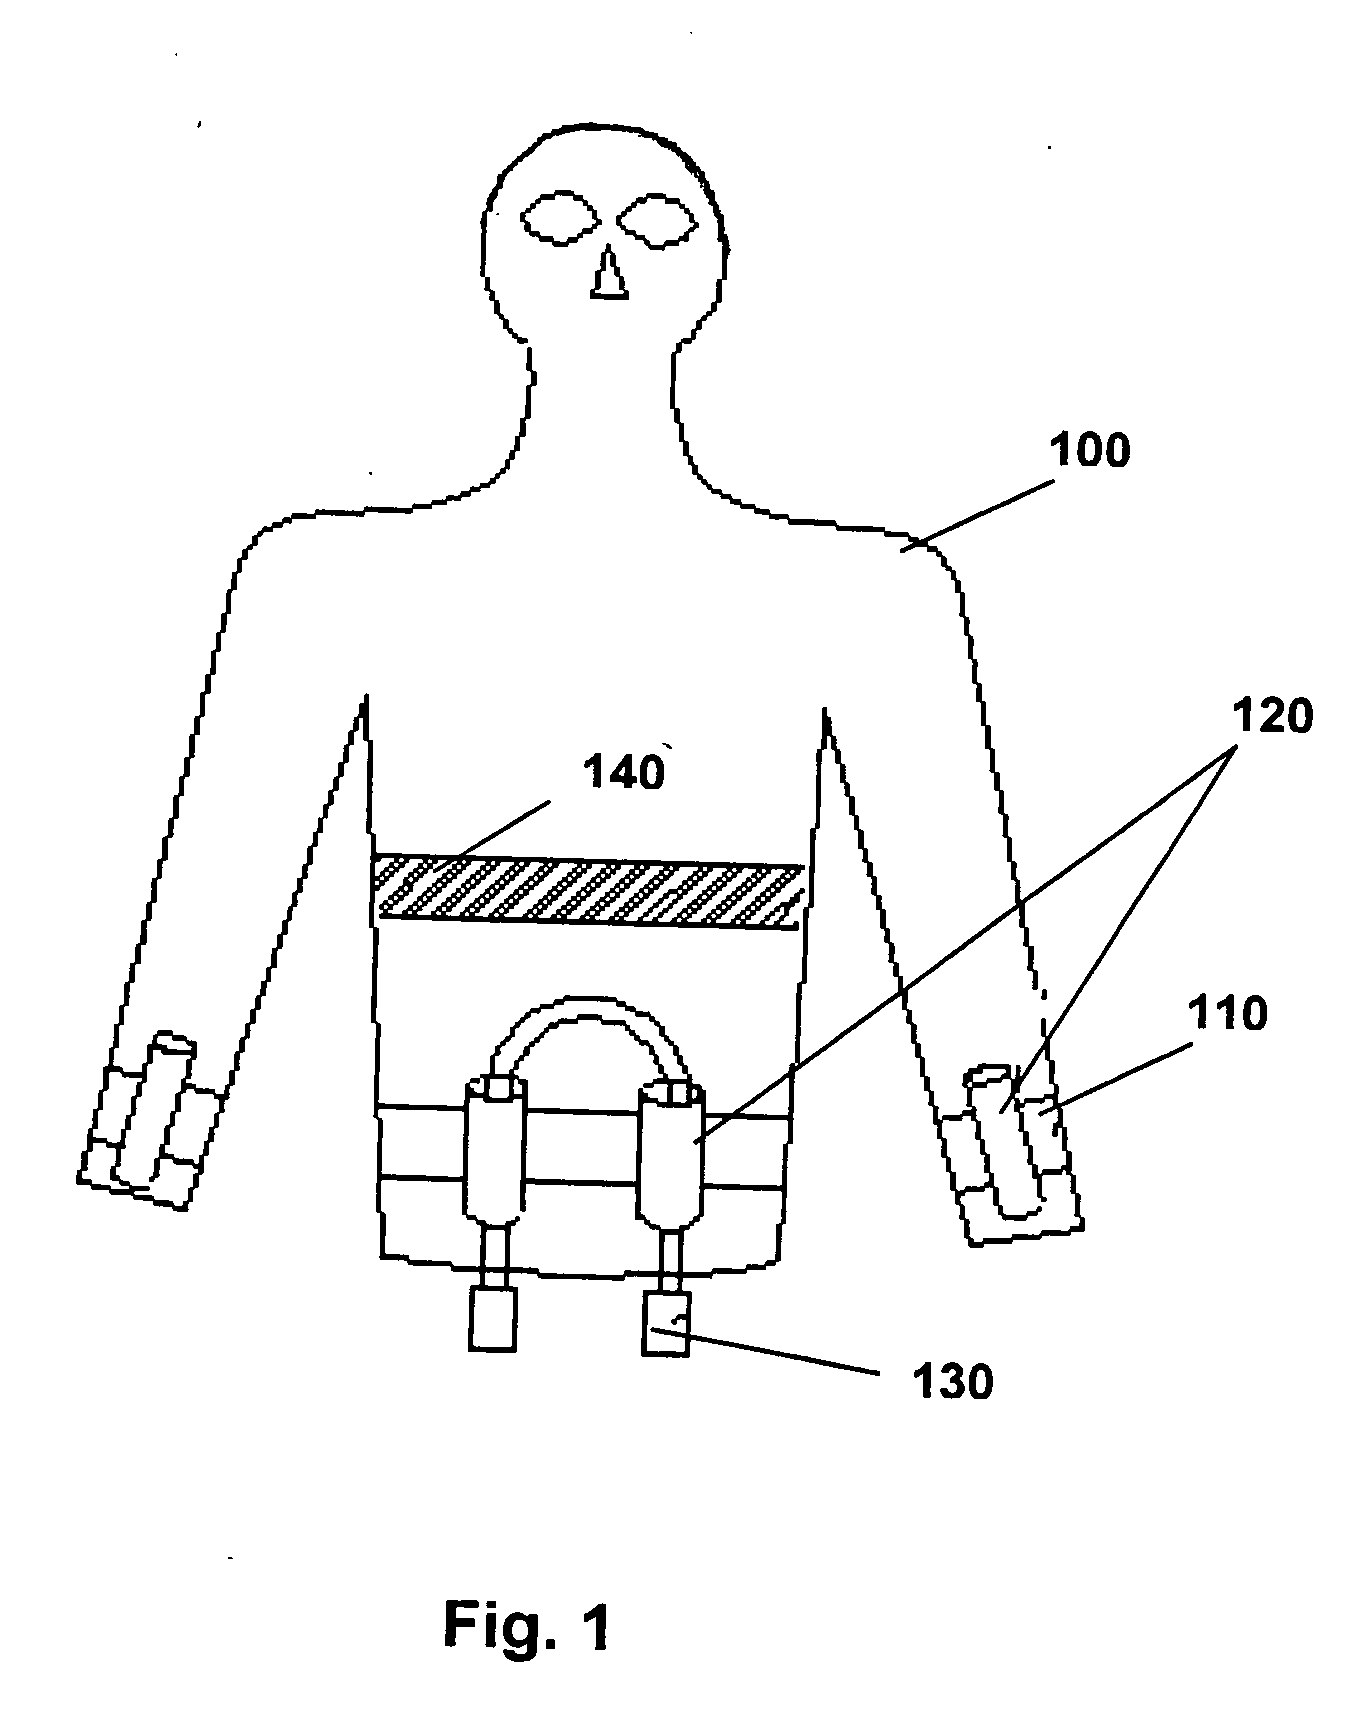 System for creating artificial gravity conditions in micro and hypogravity environments